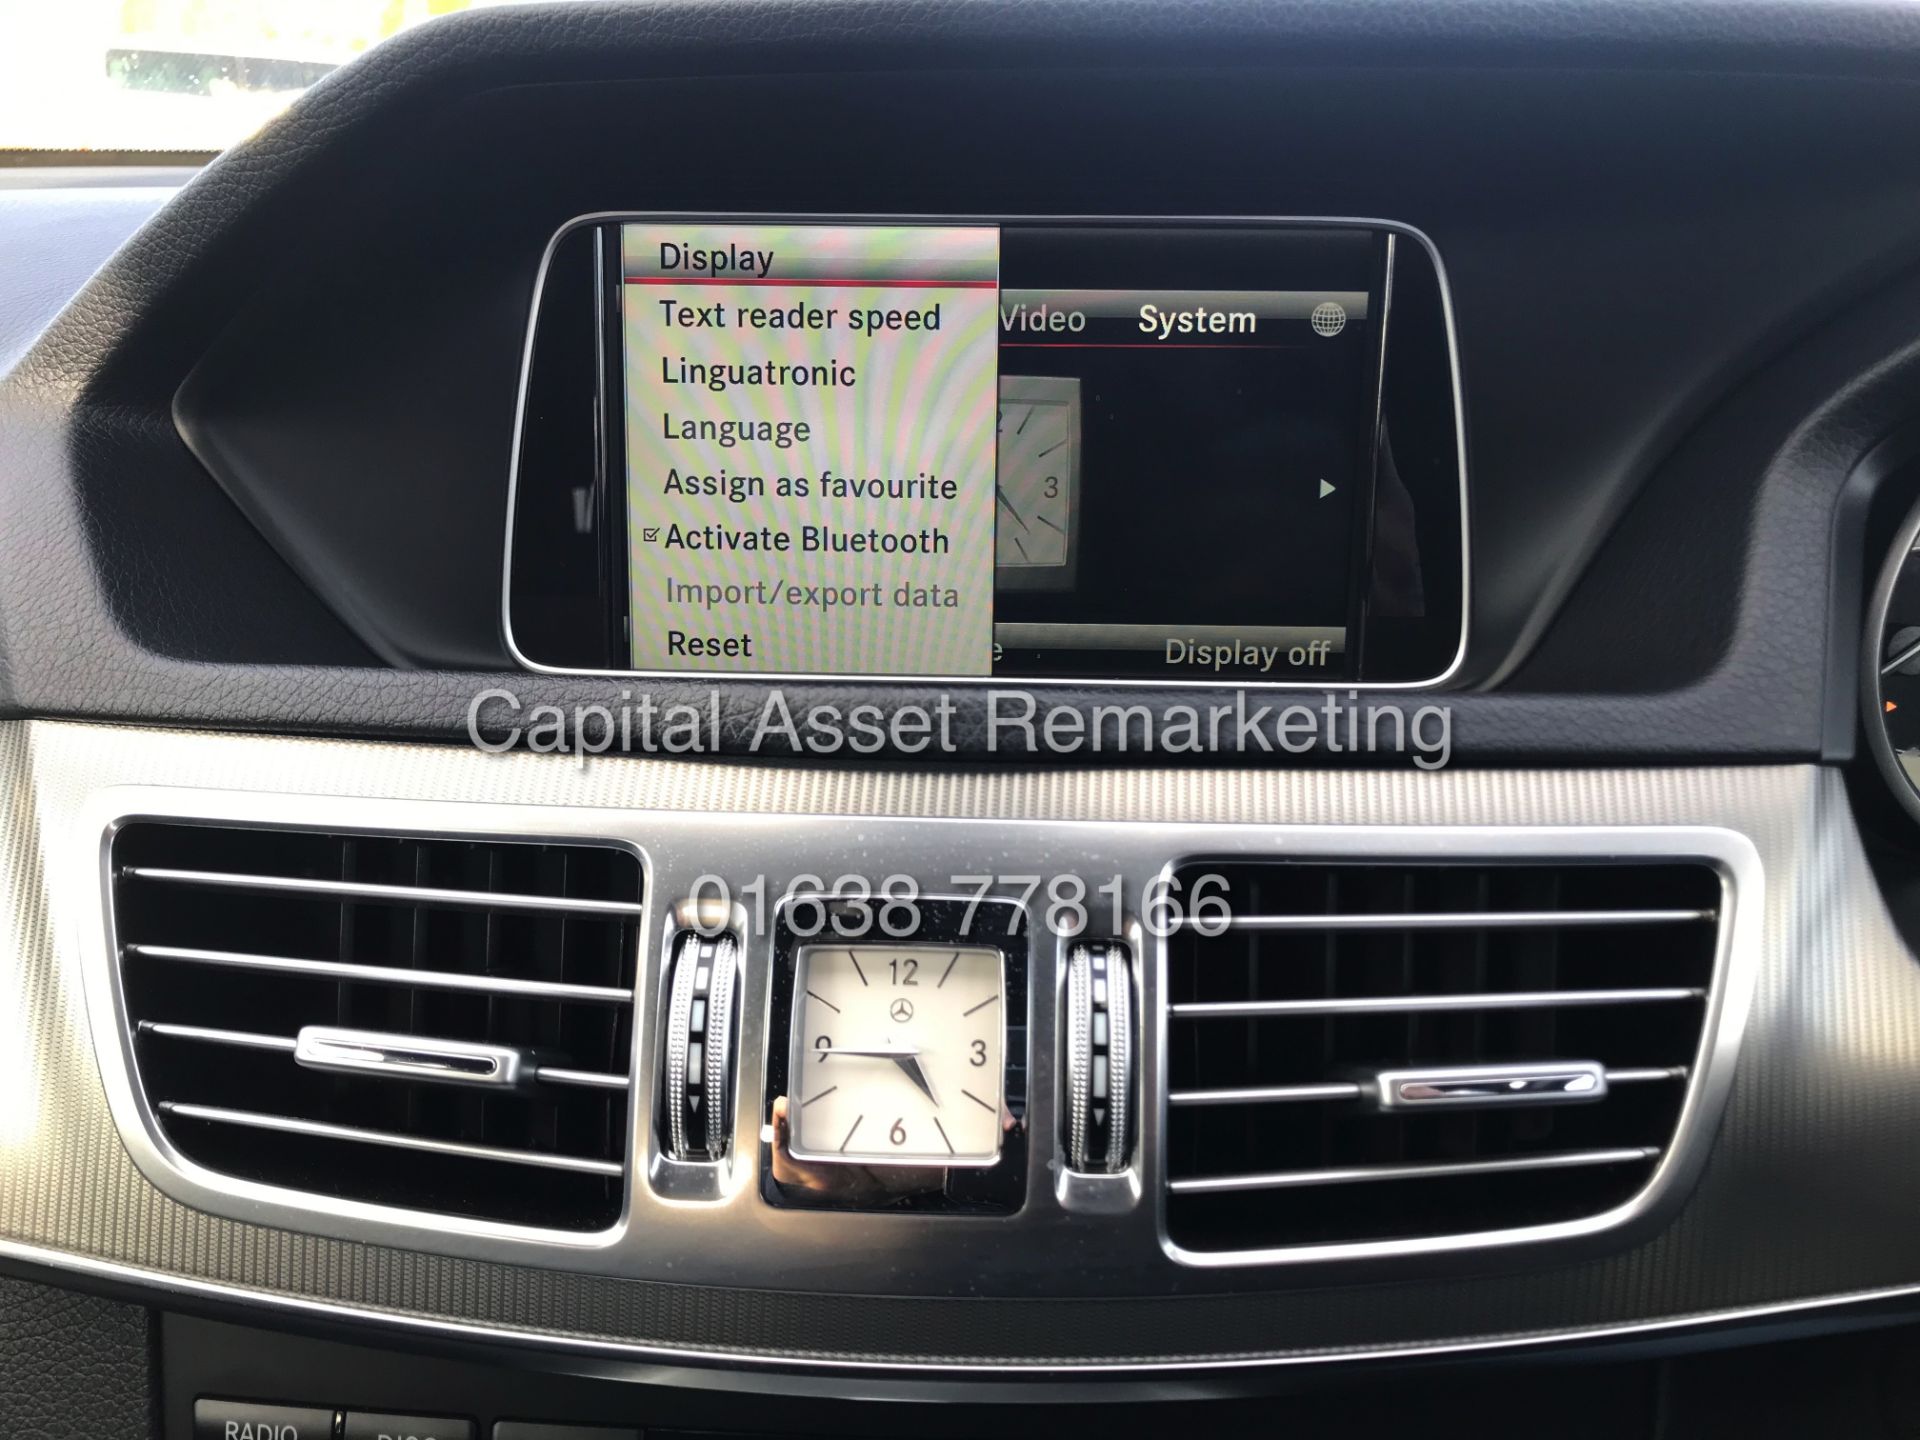 MERCEDES E220d "SPECIAL EQUIPMENT" 7G AUTO (64 REG) SAT NAV - FULL LEATHER - 1 OWNER - CLIMATE - Image 20 of 24